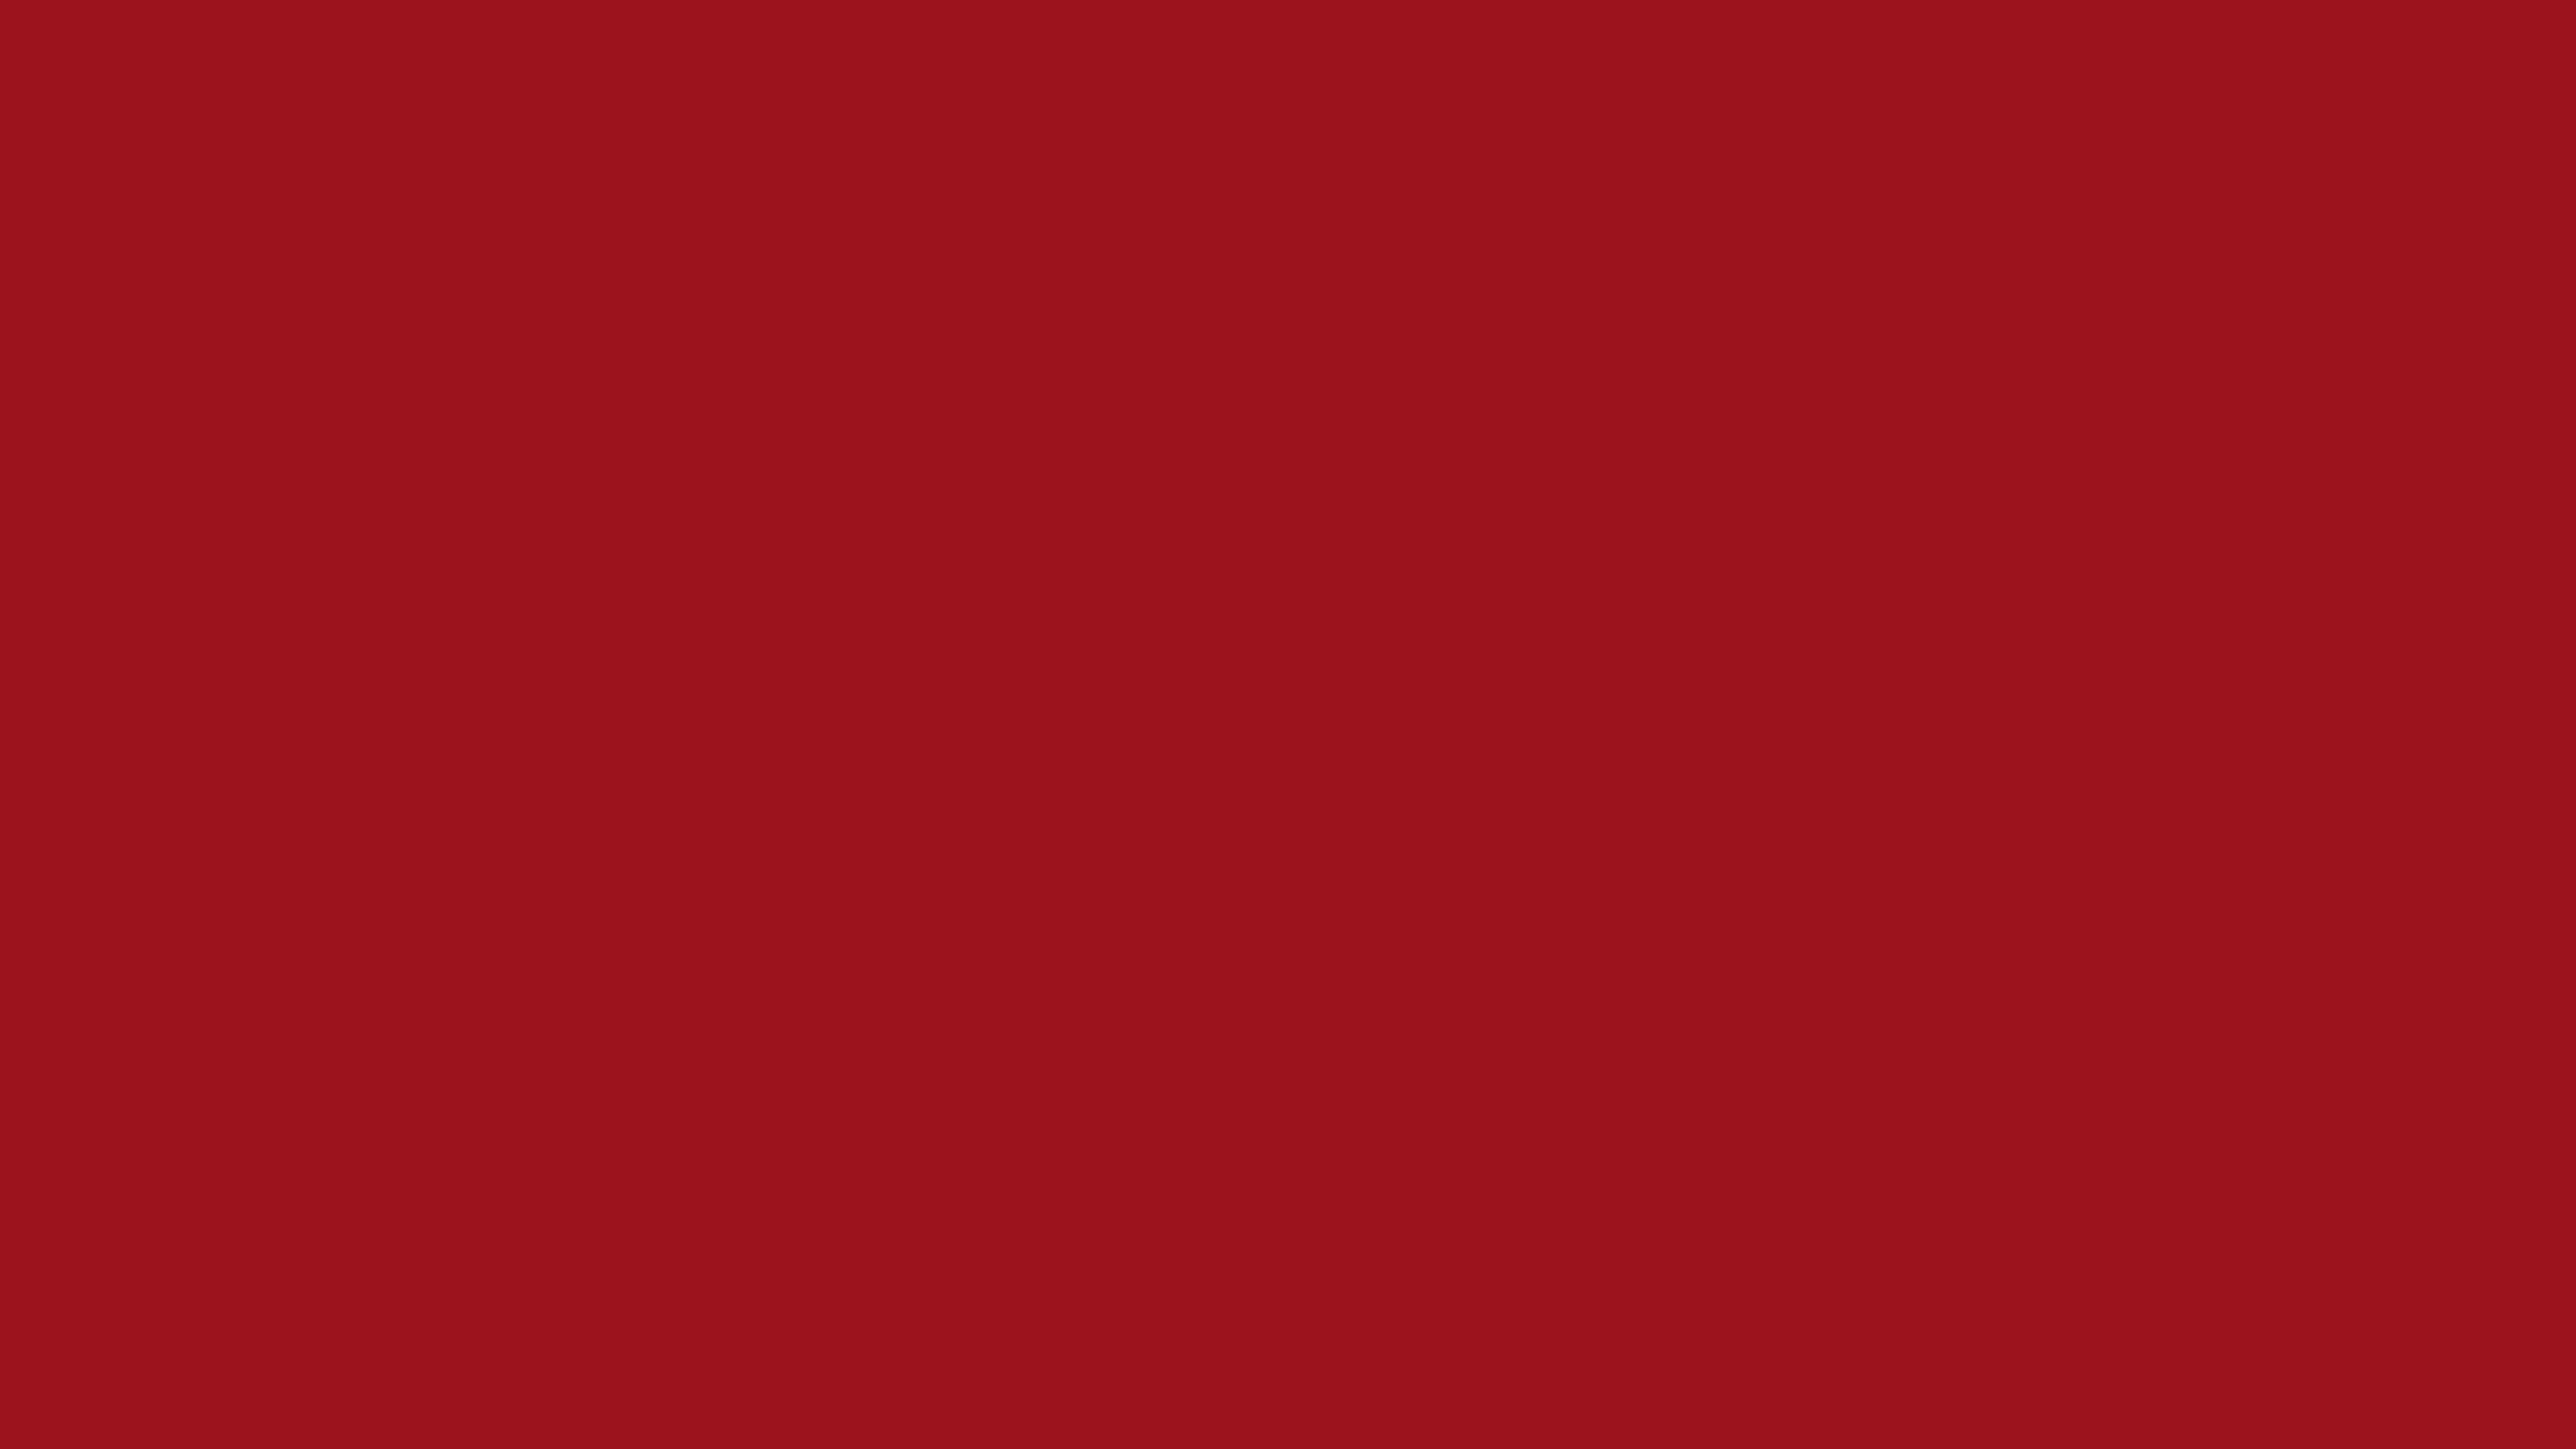 5120x2880 Ruby Red Solid Color Background